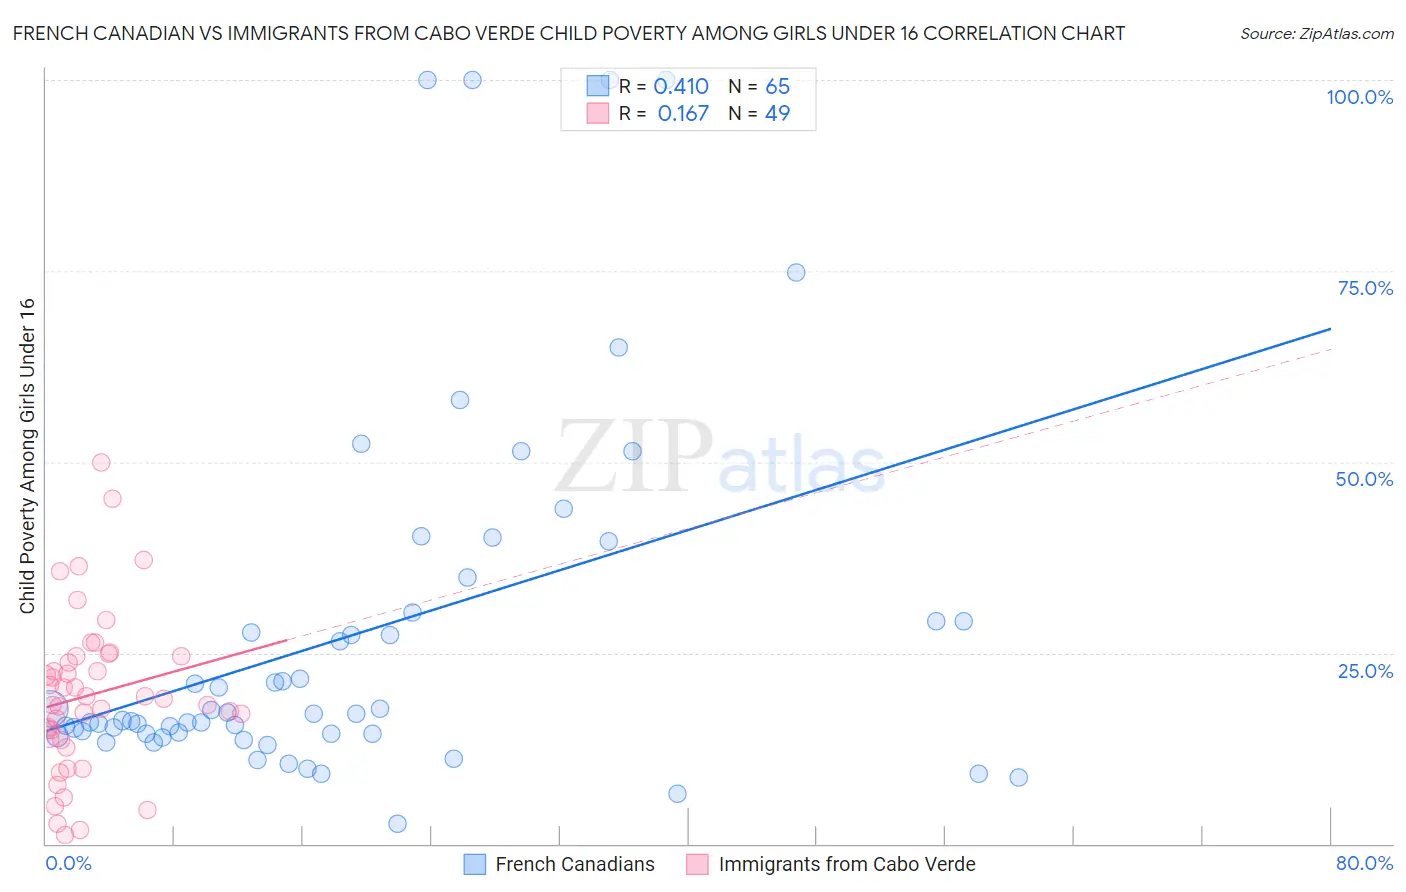 French Canadian vs Immigrants from Cabo Verde Child Poverty Among Girls Under 16